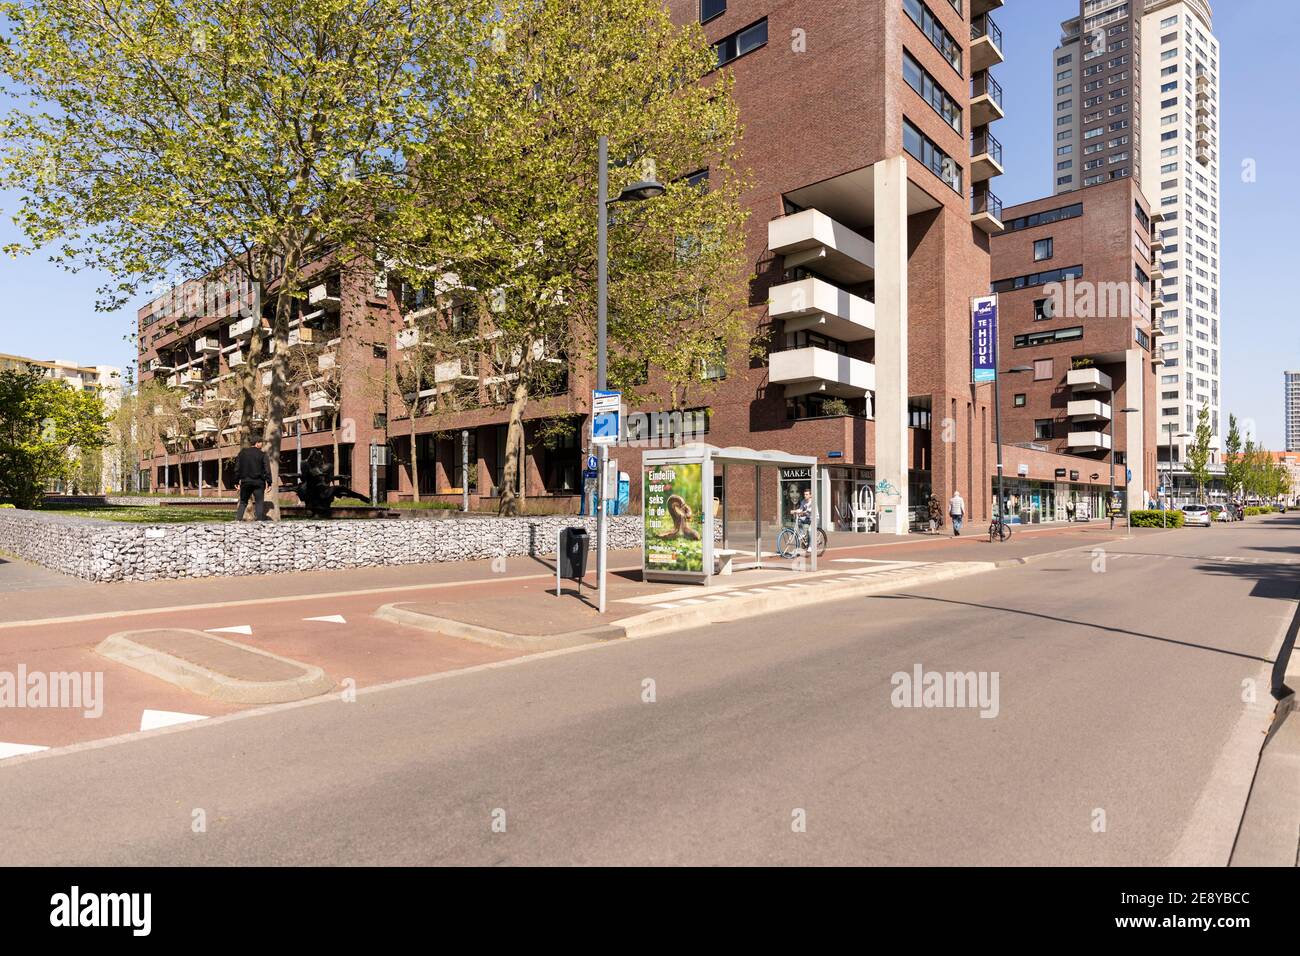 Eindhoven, The Netherlands, 21st May 2020. Eindhoven City with a road, a sidewalk, buildings with stores and a bus stop on a sunny day during lockdown Stock Photo